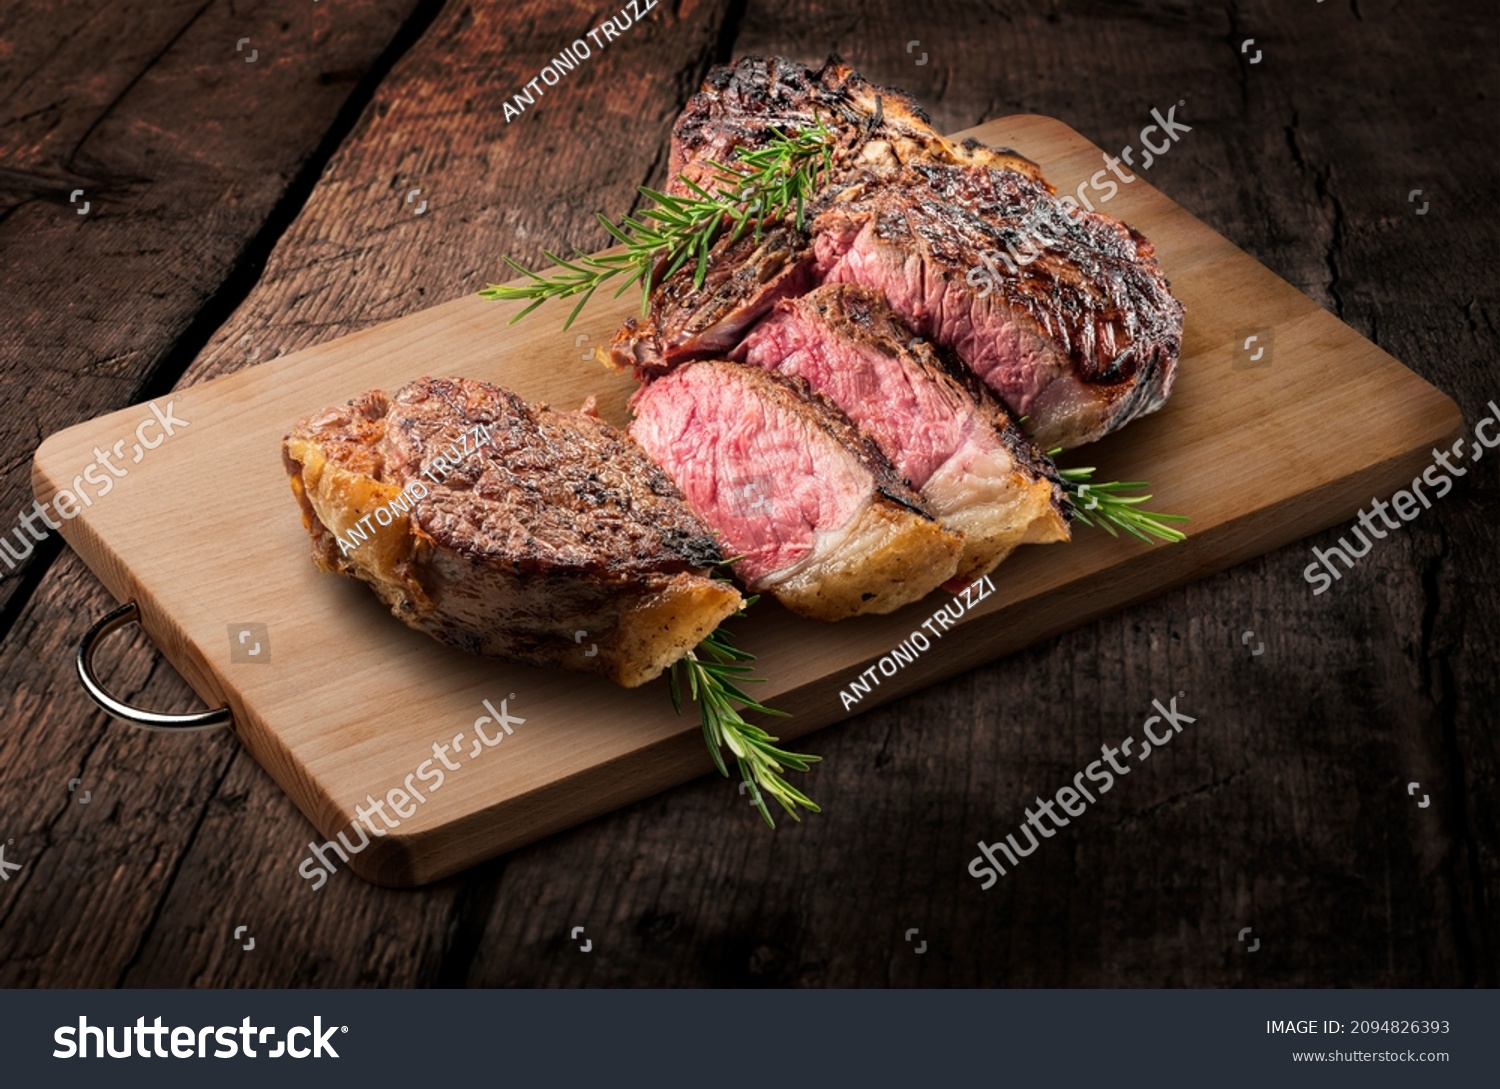 Fiorentina T-bone steak cut on rectangular wooden chopping board and vegetables isolated on white background #2094826393